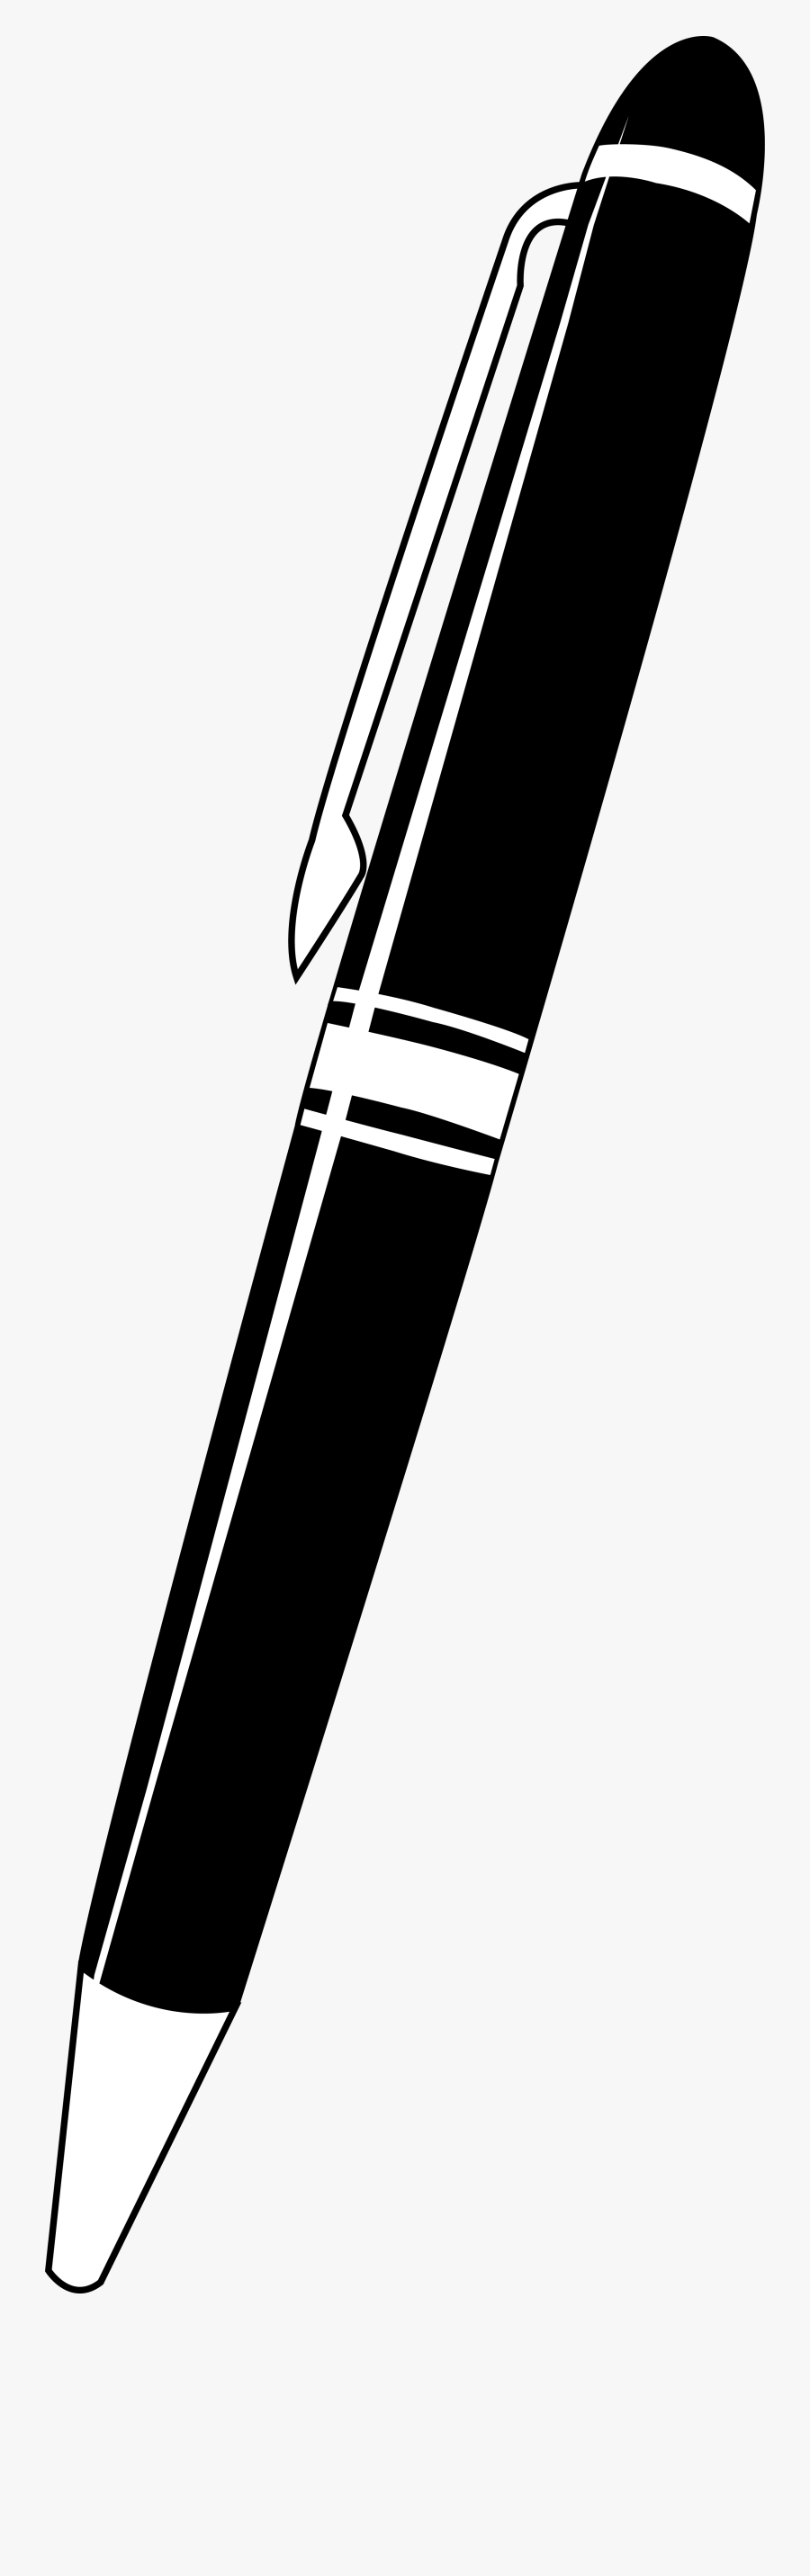 28 Collection Of Pen Clipart Black And White Png - Black And White Pen, Transparent Clipart